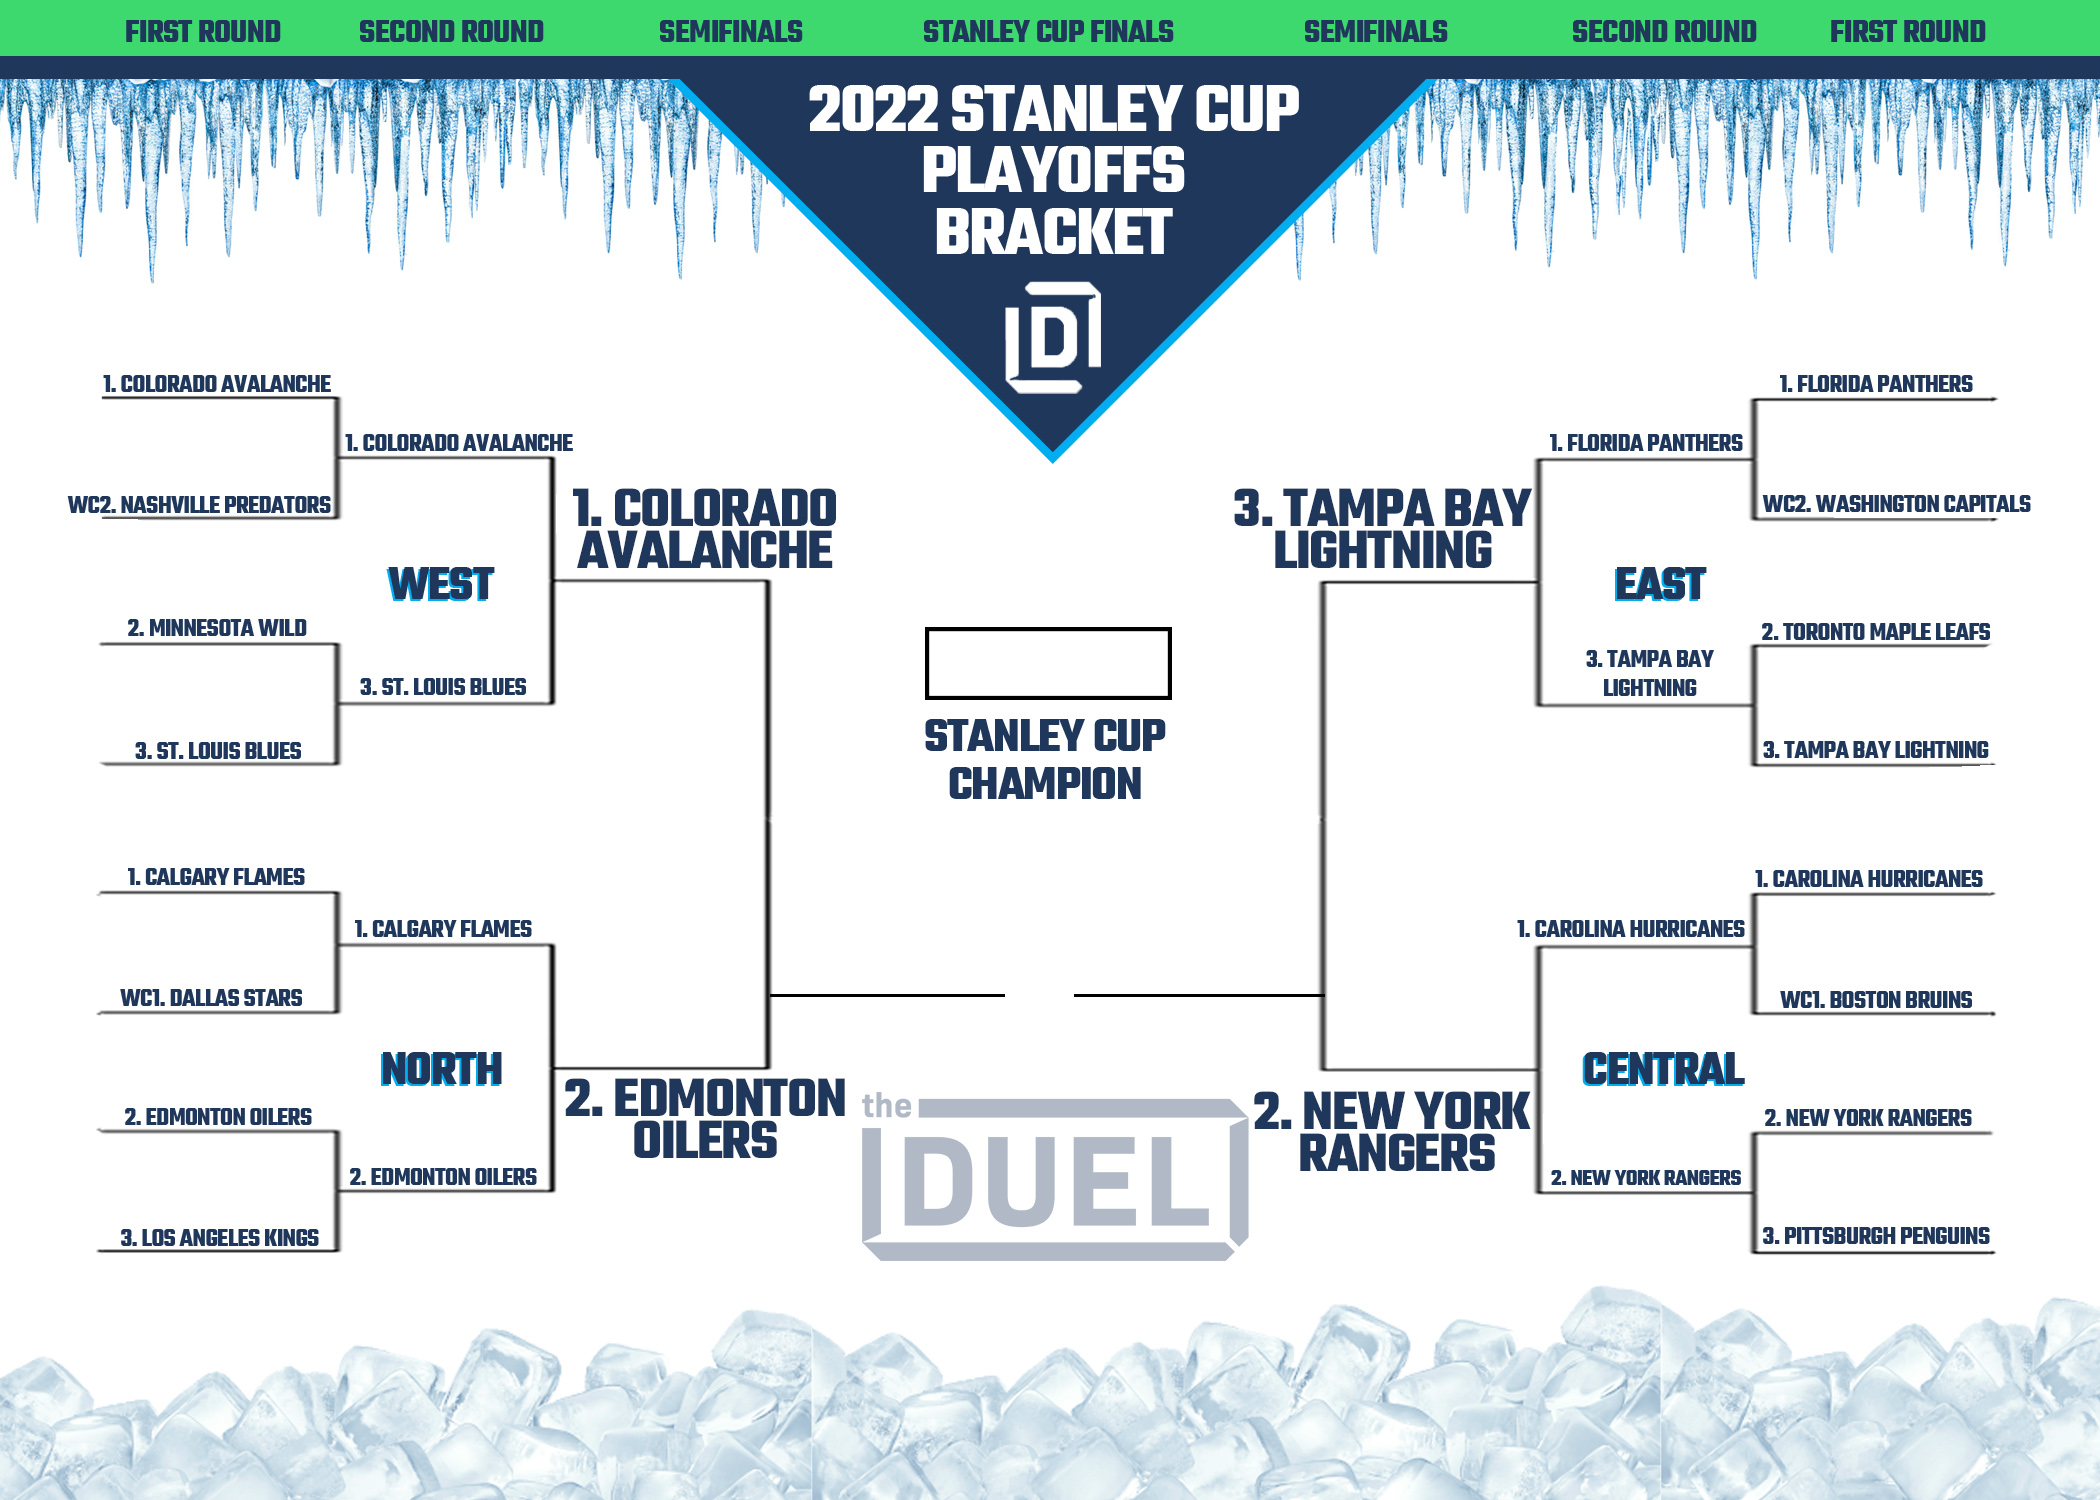 Stanley Cup Playoffs Bracket 2022 Heading into NHL Conference Finals